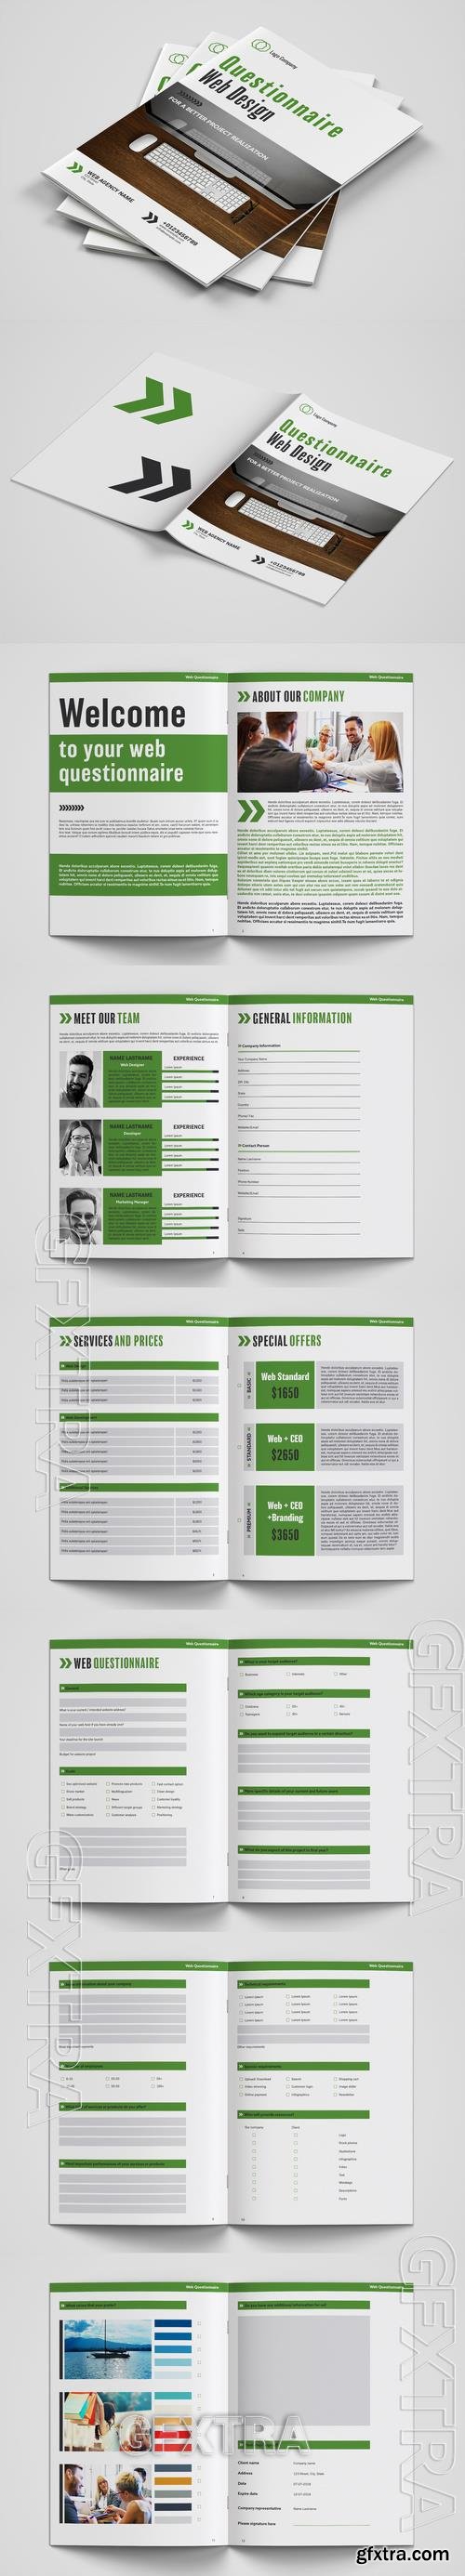 Questionnaire Layout with Green Accents 211177709